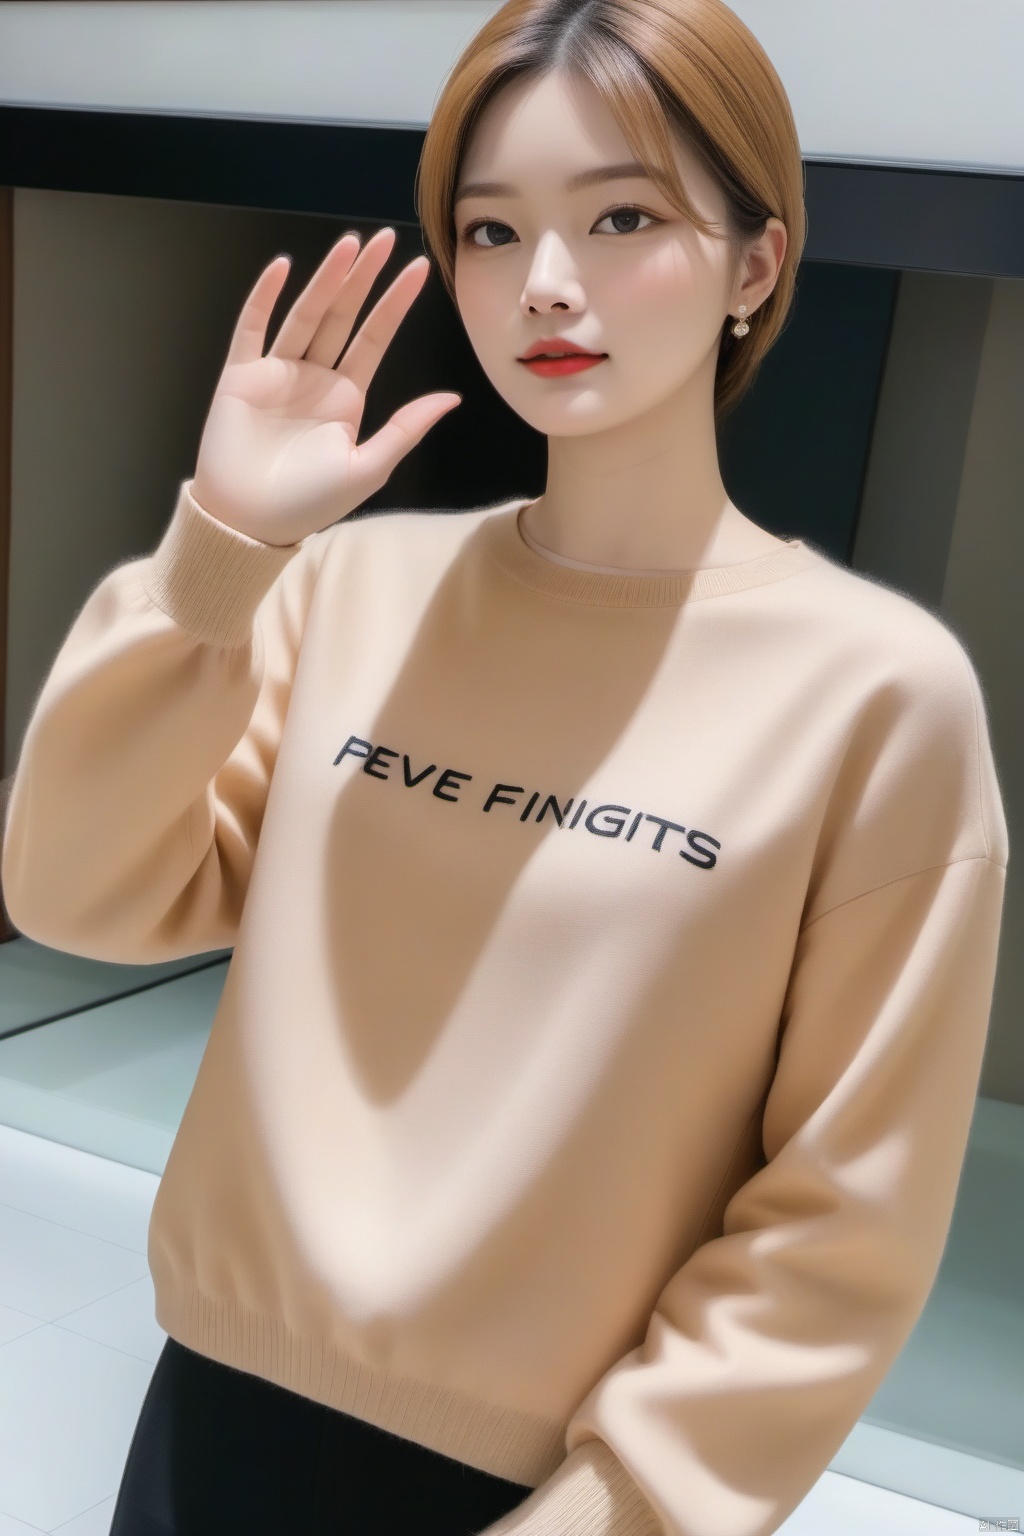  masterpiece,best quality,
nicehand,five fingers,hand, solo, realistic, reflection, close-up, indoors, long sleeves, sweater